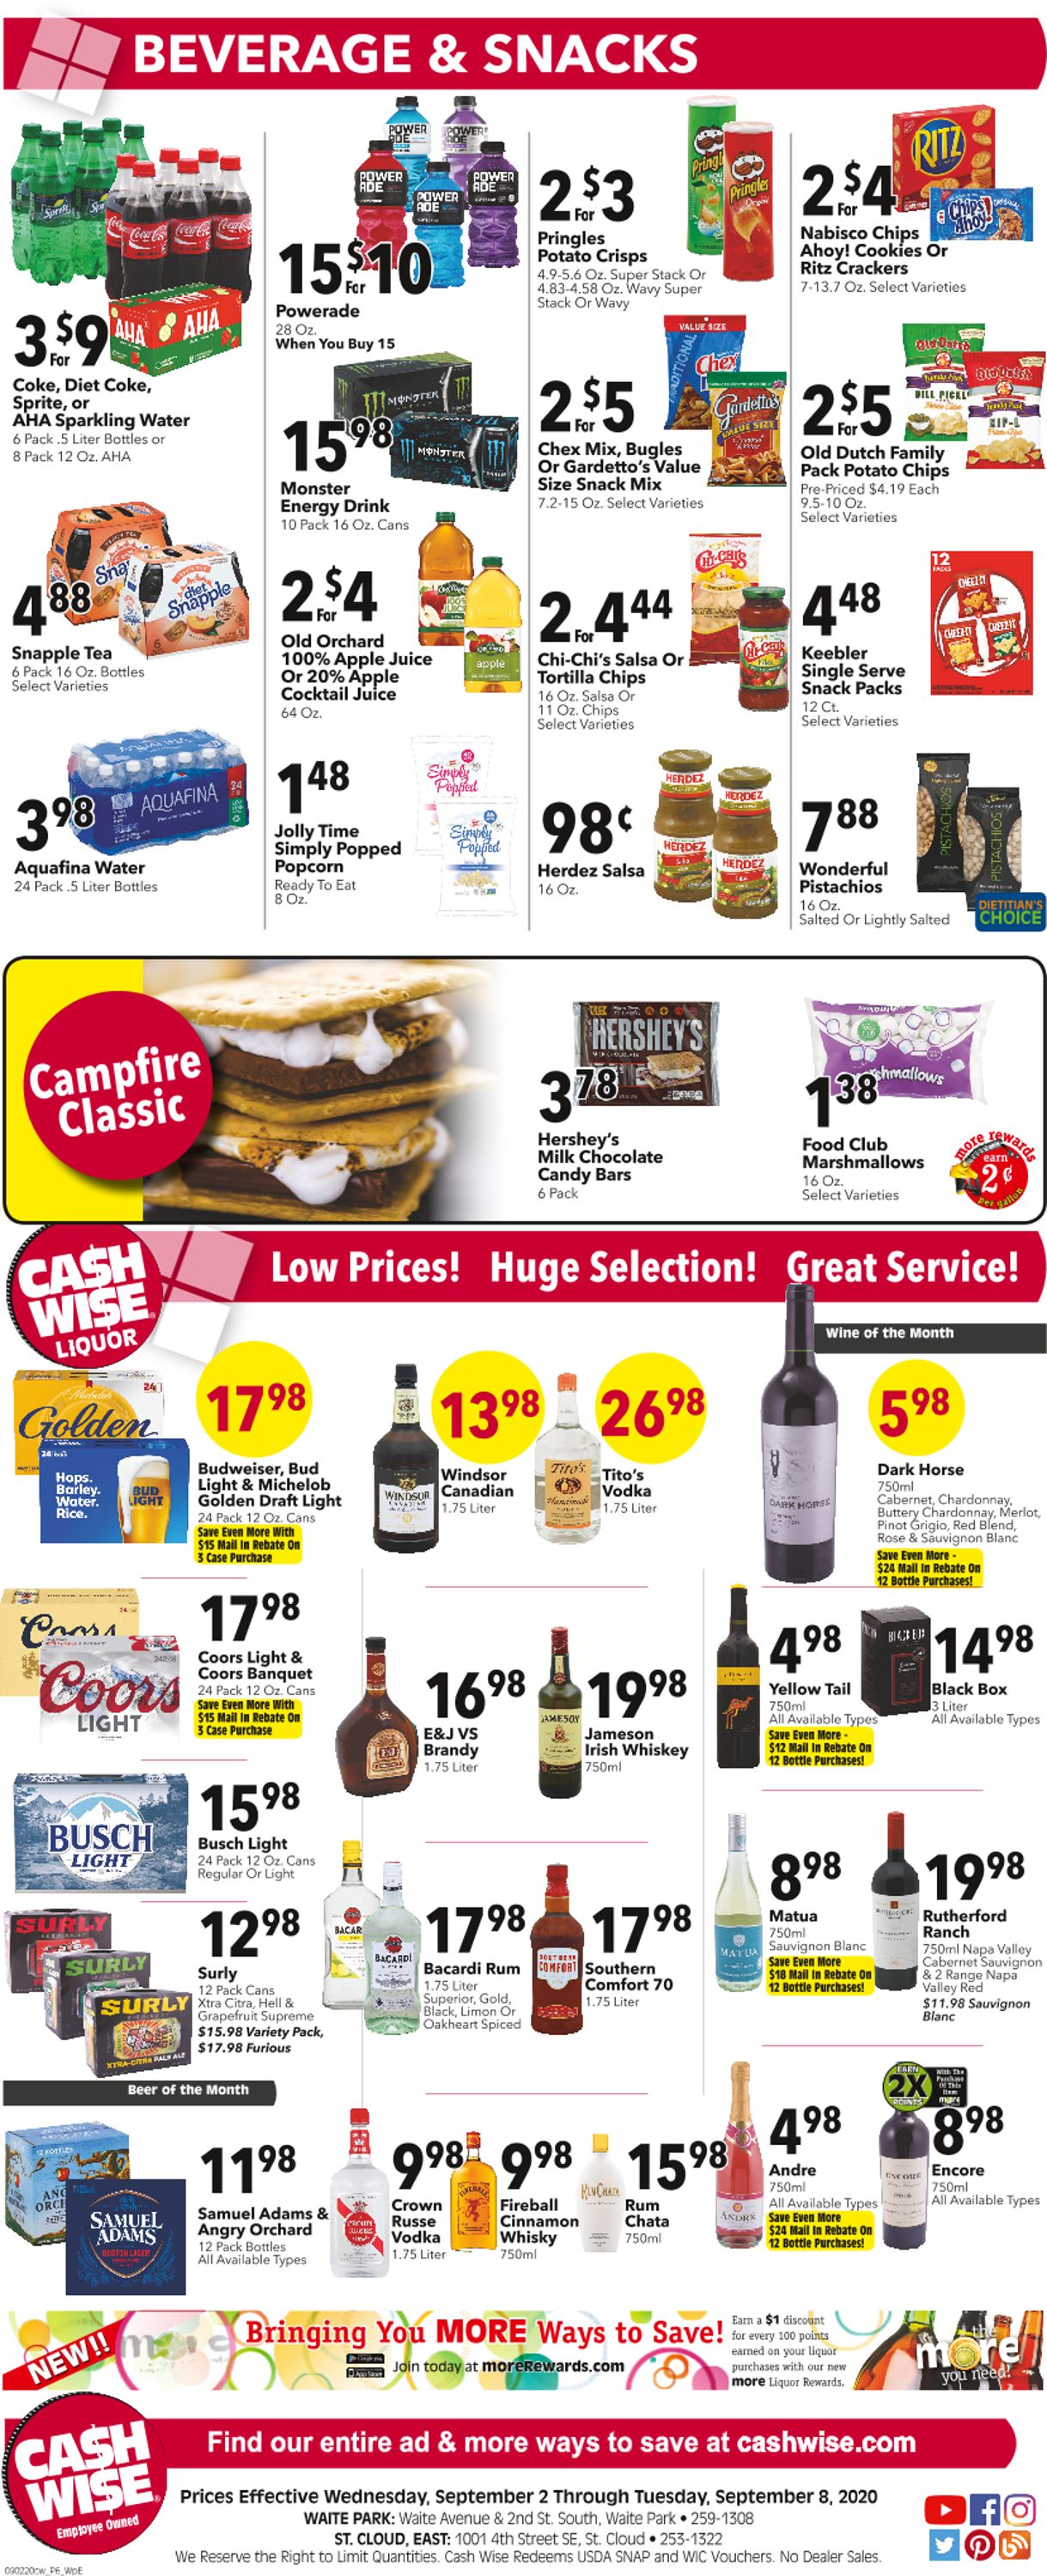 Cash Wise Weekly Ad Circular - valid 09/02-09/08/2020 (Page 5)